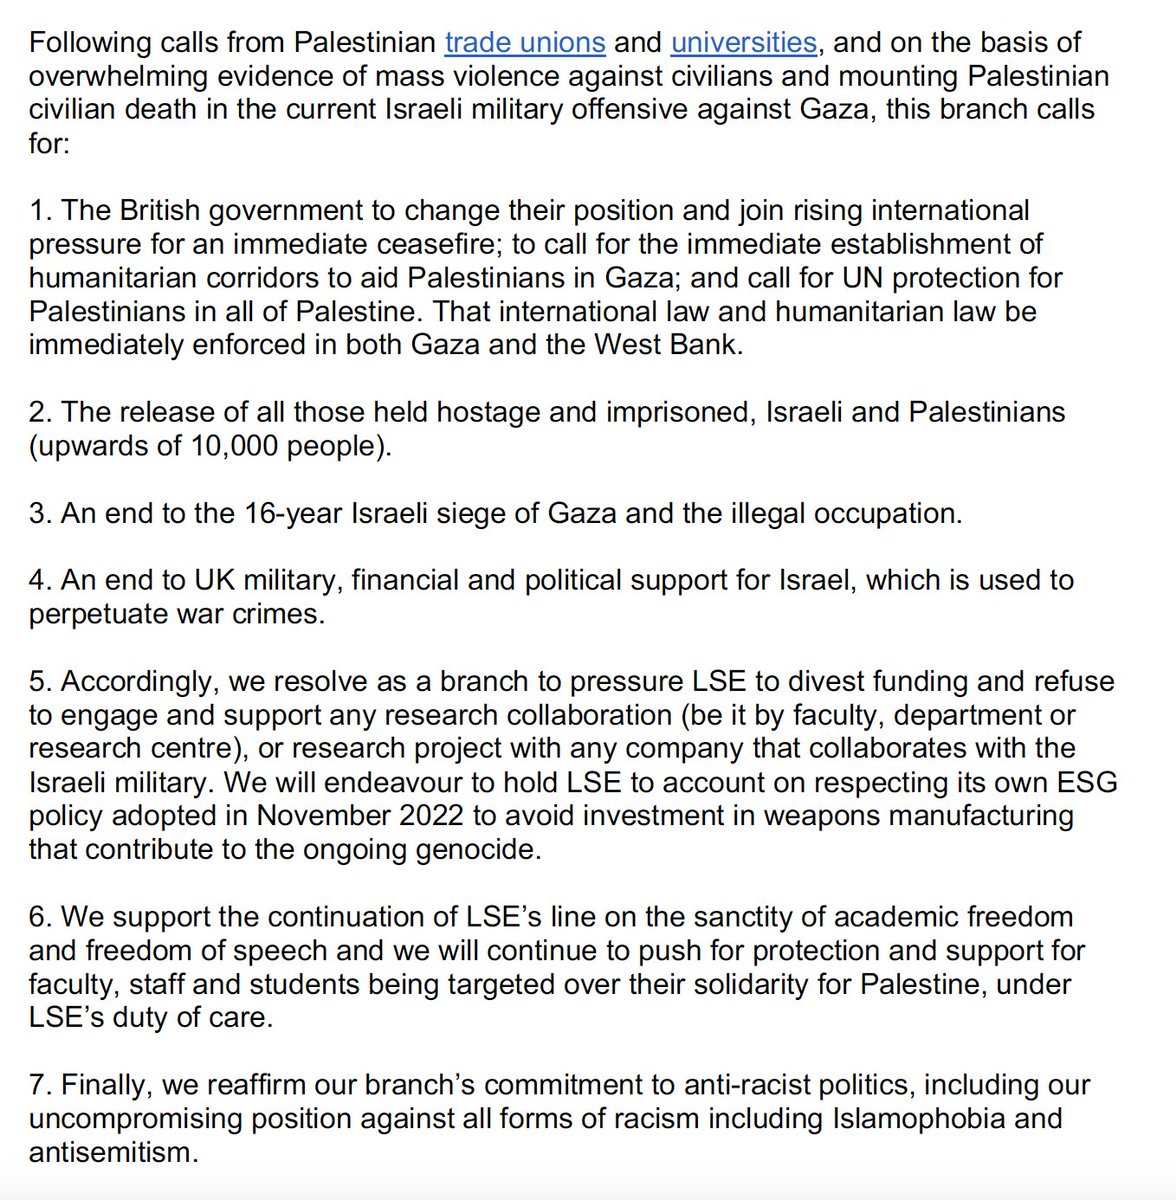 At an Extraordinary General Meeting this week @LSE_UCU branch members have passed the motion 'Solidarity with Palestine and Academic Freedom'.